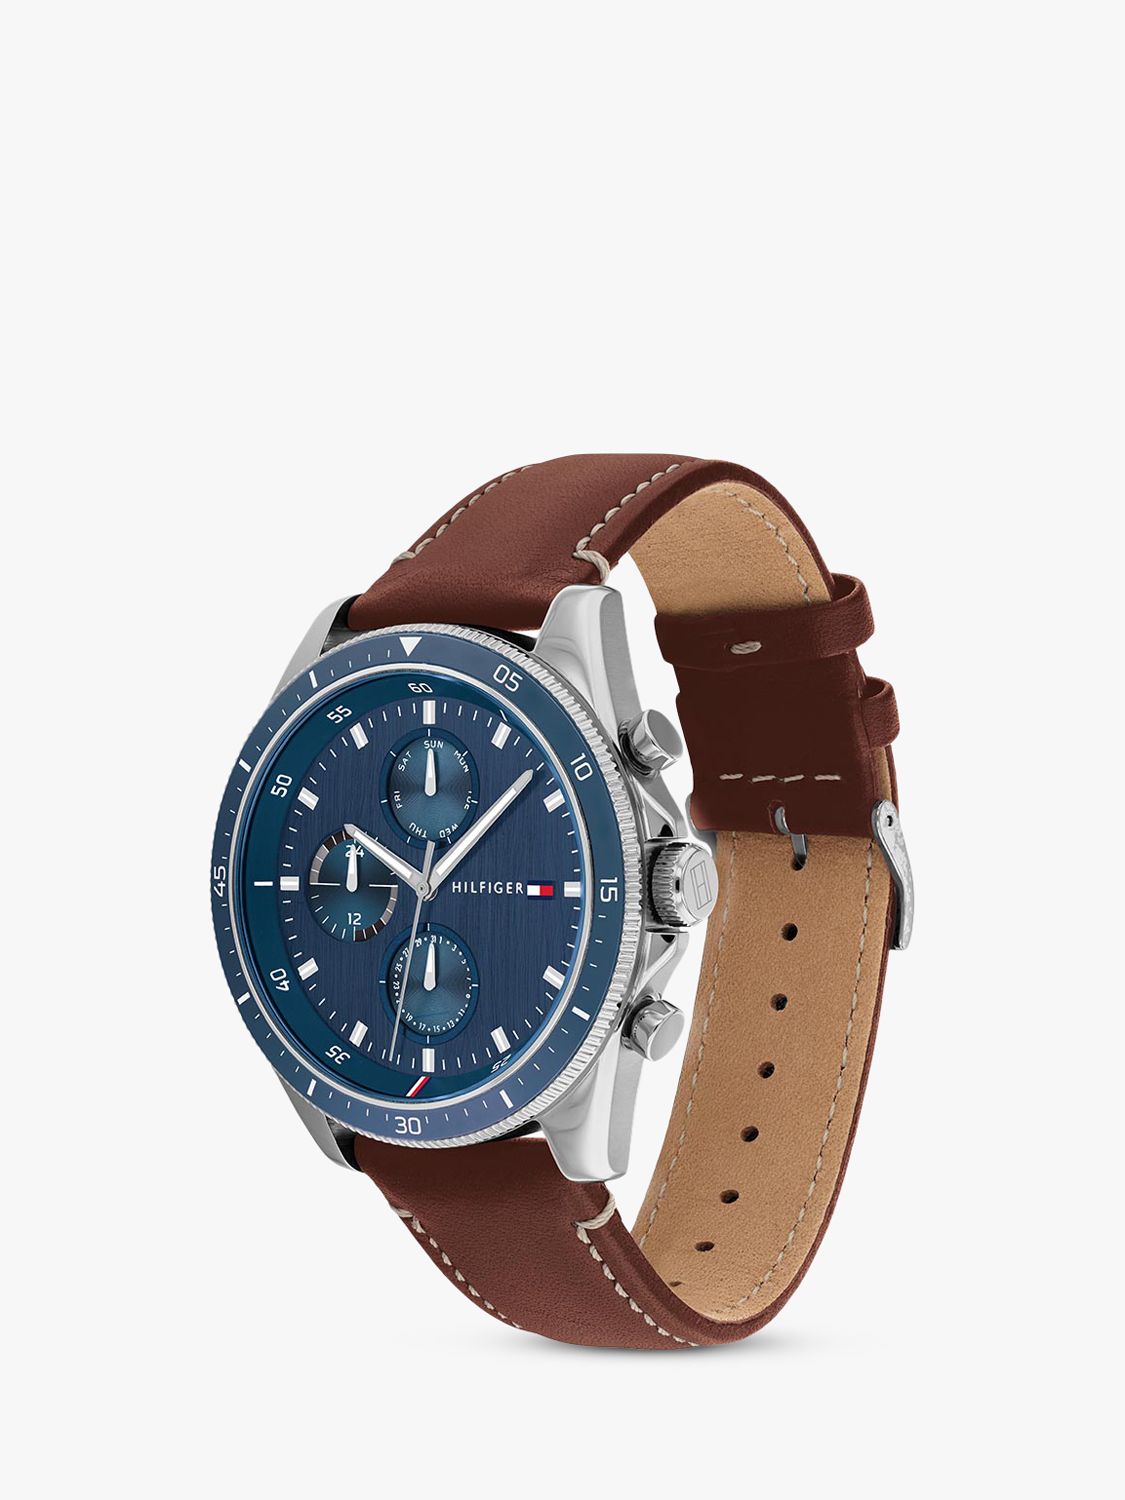 Buy Tommy Hilfiger Men's Chronograph Leather Strap Watch Online at johnlewis.com